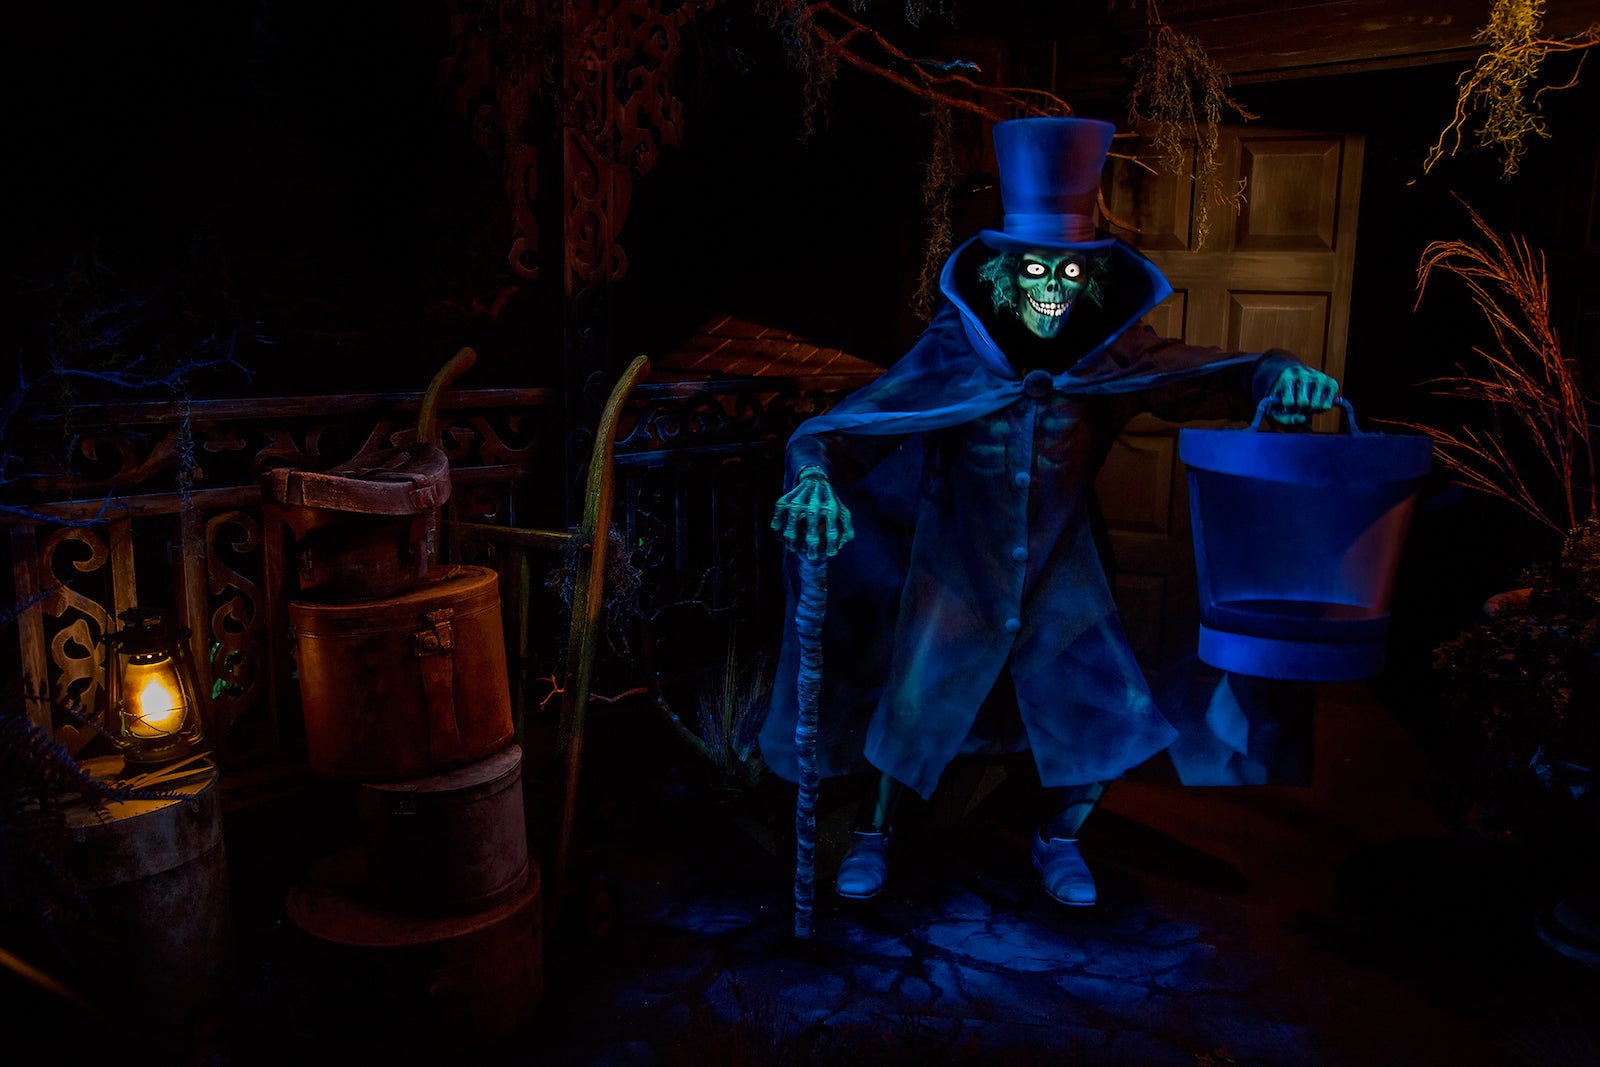 New character Hatbox Ghost